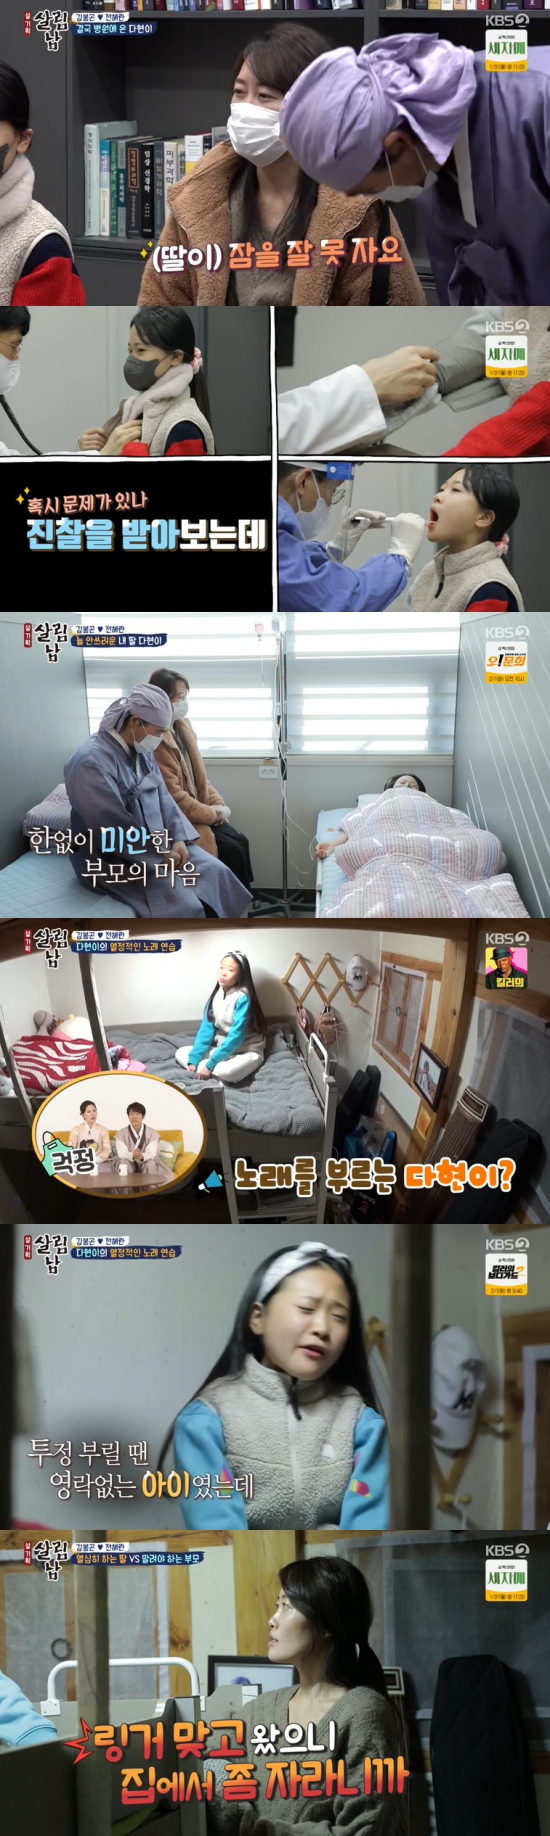 On the 29th KBS 2TV Saving Men Season 2, Kim Dahyun decided to go home schooling.Kim Dahyun mother worried that Kim Dahyuns condition was not good, and said, Since the contest was over, Dahyun has loved many people and Dahyun seems to have had a very busy Haru Haru.Kim Dahyun said, Haru practiced and shot the broadcasts, performed performances, and the school was steadily Gaya.Now, it seems that Dahyun, who graduated from Elementary school, is inevitably hard to do. Eventually, Kim Bong-gon decoration and Kim Dahyun mother took Kim Dahyun to the hospital, and Kim Dahyun mother said, Dahyun does not sleep well.So I feel so tired. The doctor examined Kim Dahyun and said, My neck is very red. I think I have a neck Flu.I will prescribe the neck Flu drug after receiving the sap. Kim Dahyun mother watched Kim Dahyun who was in the sap, and expressed regret that I have a lot of schedule because I am having difficulty at that age, so I will not have a ringer.Kim Bong-gon decoration bitterly said, Its hard to be the head of my house. Its too much.Kim Dahyun practiced singing when he recovered from his condition, and Kim Dahyuns mother said, Stop singing, its ringer and it grows a little.Kim Dahyun reassured her, saying, I wanted to sing. Kim Dahyun asked, I have to rest. Im worried about my mother.Kim Dahyun showed off her passion, saying it was fun.But Kim Dahyuns mother said, Its vacation, so there are a lot of broadcasting schedules now, do not practice singing anymore.In particular, Kim Bong-gon decoration said, In a month or so, it is a middle school Gaya, but it may be a way to reduce the schedule. Kim Dahyun said, But does school necessarily Gaya?If you go to Middle School, you may have to get out a lot. I can not follow the progress, so it may be behind my friends.Kim Dahyun then consulted her sister Kim Ja-han while her parents were away. Kim Dahyun said, Are schools necessarily Gaya?I now want to go to Middle School and study, sing harder, Gaya gold and piano.I am worried that I can do it all and I am worried. Kim Ja-han said, Did you miss a lot of Elementary school too, and it can be (difference) big to drop out of school study.My sister went through the regular course and walked the average way, but I do not think it should be.Some people go to alternative schools, some do not go to school, and some do home schooling at home. Kim Dahyun later expressed his desire to homeschool as soon as Kim Bong-gon decoration and Kim Dahyun mother returned home.Kim Dahyun said: I decided: theres a way to study at home, not at school.So I want to study at home, said Kim Jae-han. I can do it by home schooling. It is a compulsory education, so it is a necessary process.There are many things that families need to help, he added.Kim Dahyun said, Everyone seems to be anxious and worried because they say they are going to another road, not the way they go.I think its too big soon, said Kim Dahyun, who promised, Dont worry, Ill work hard. Kim Dahyun said, Im not worried.Im so excited, he said.Photo = KBS Broadcasting Screen